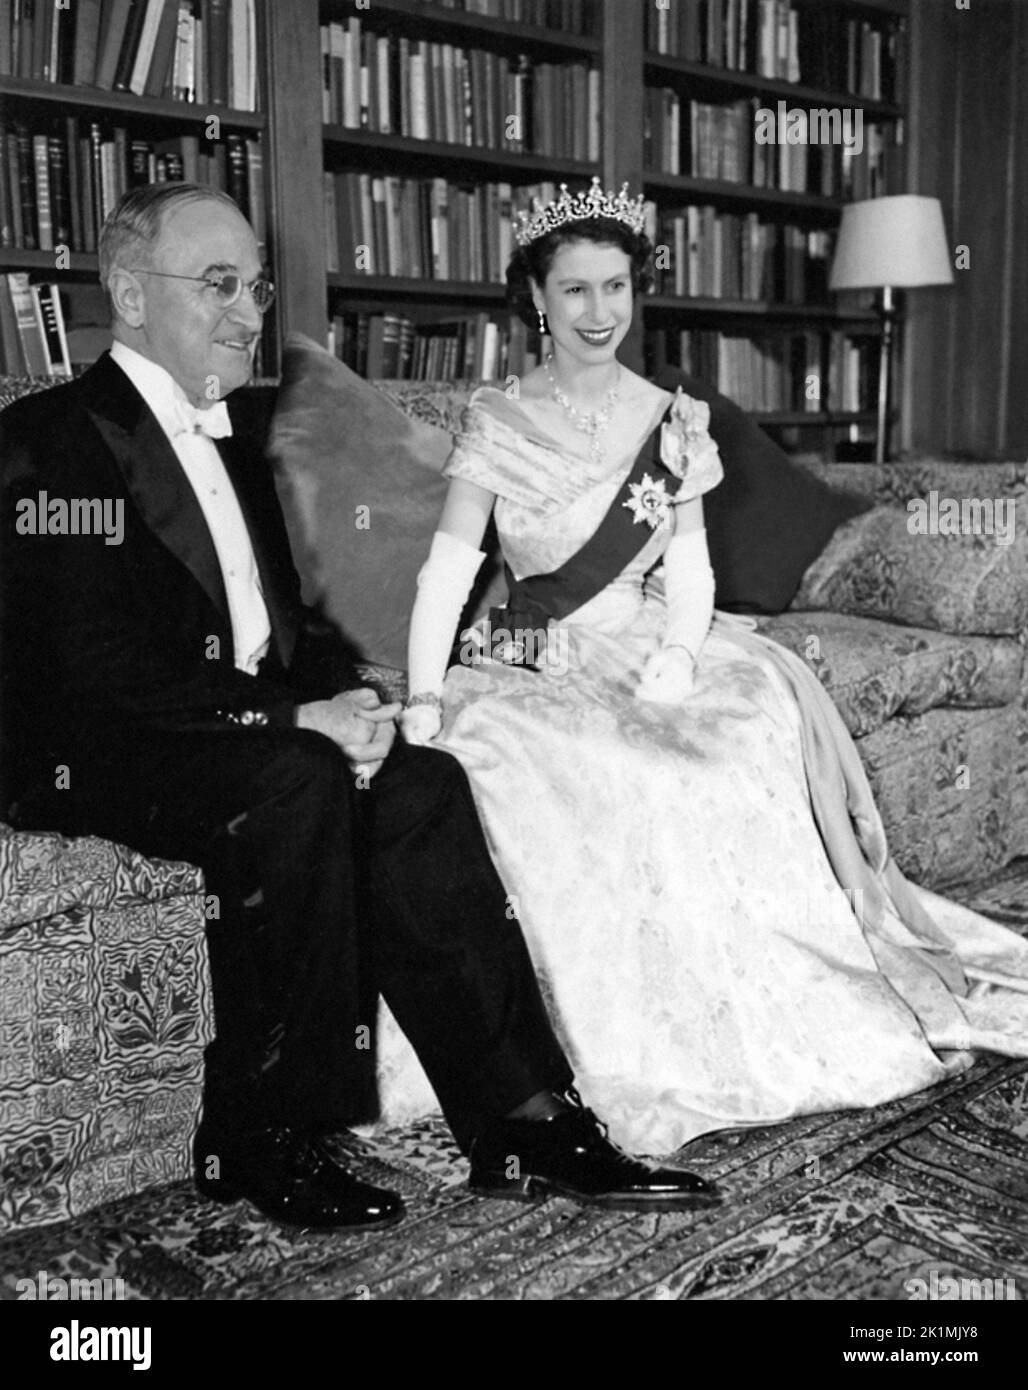 U.S. President Harry S. Truman and Princess Elizabeth of Great Britain pose for a photograph at the Canadian Embassy in Washington, D.C. on November 1, 1951 during the Princess' visit to the United States. Stock Photo